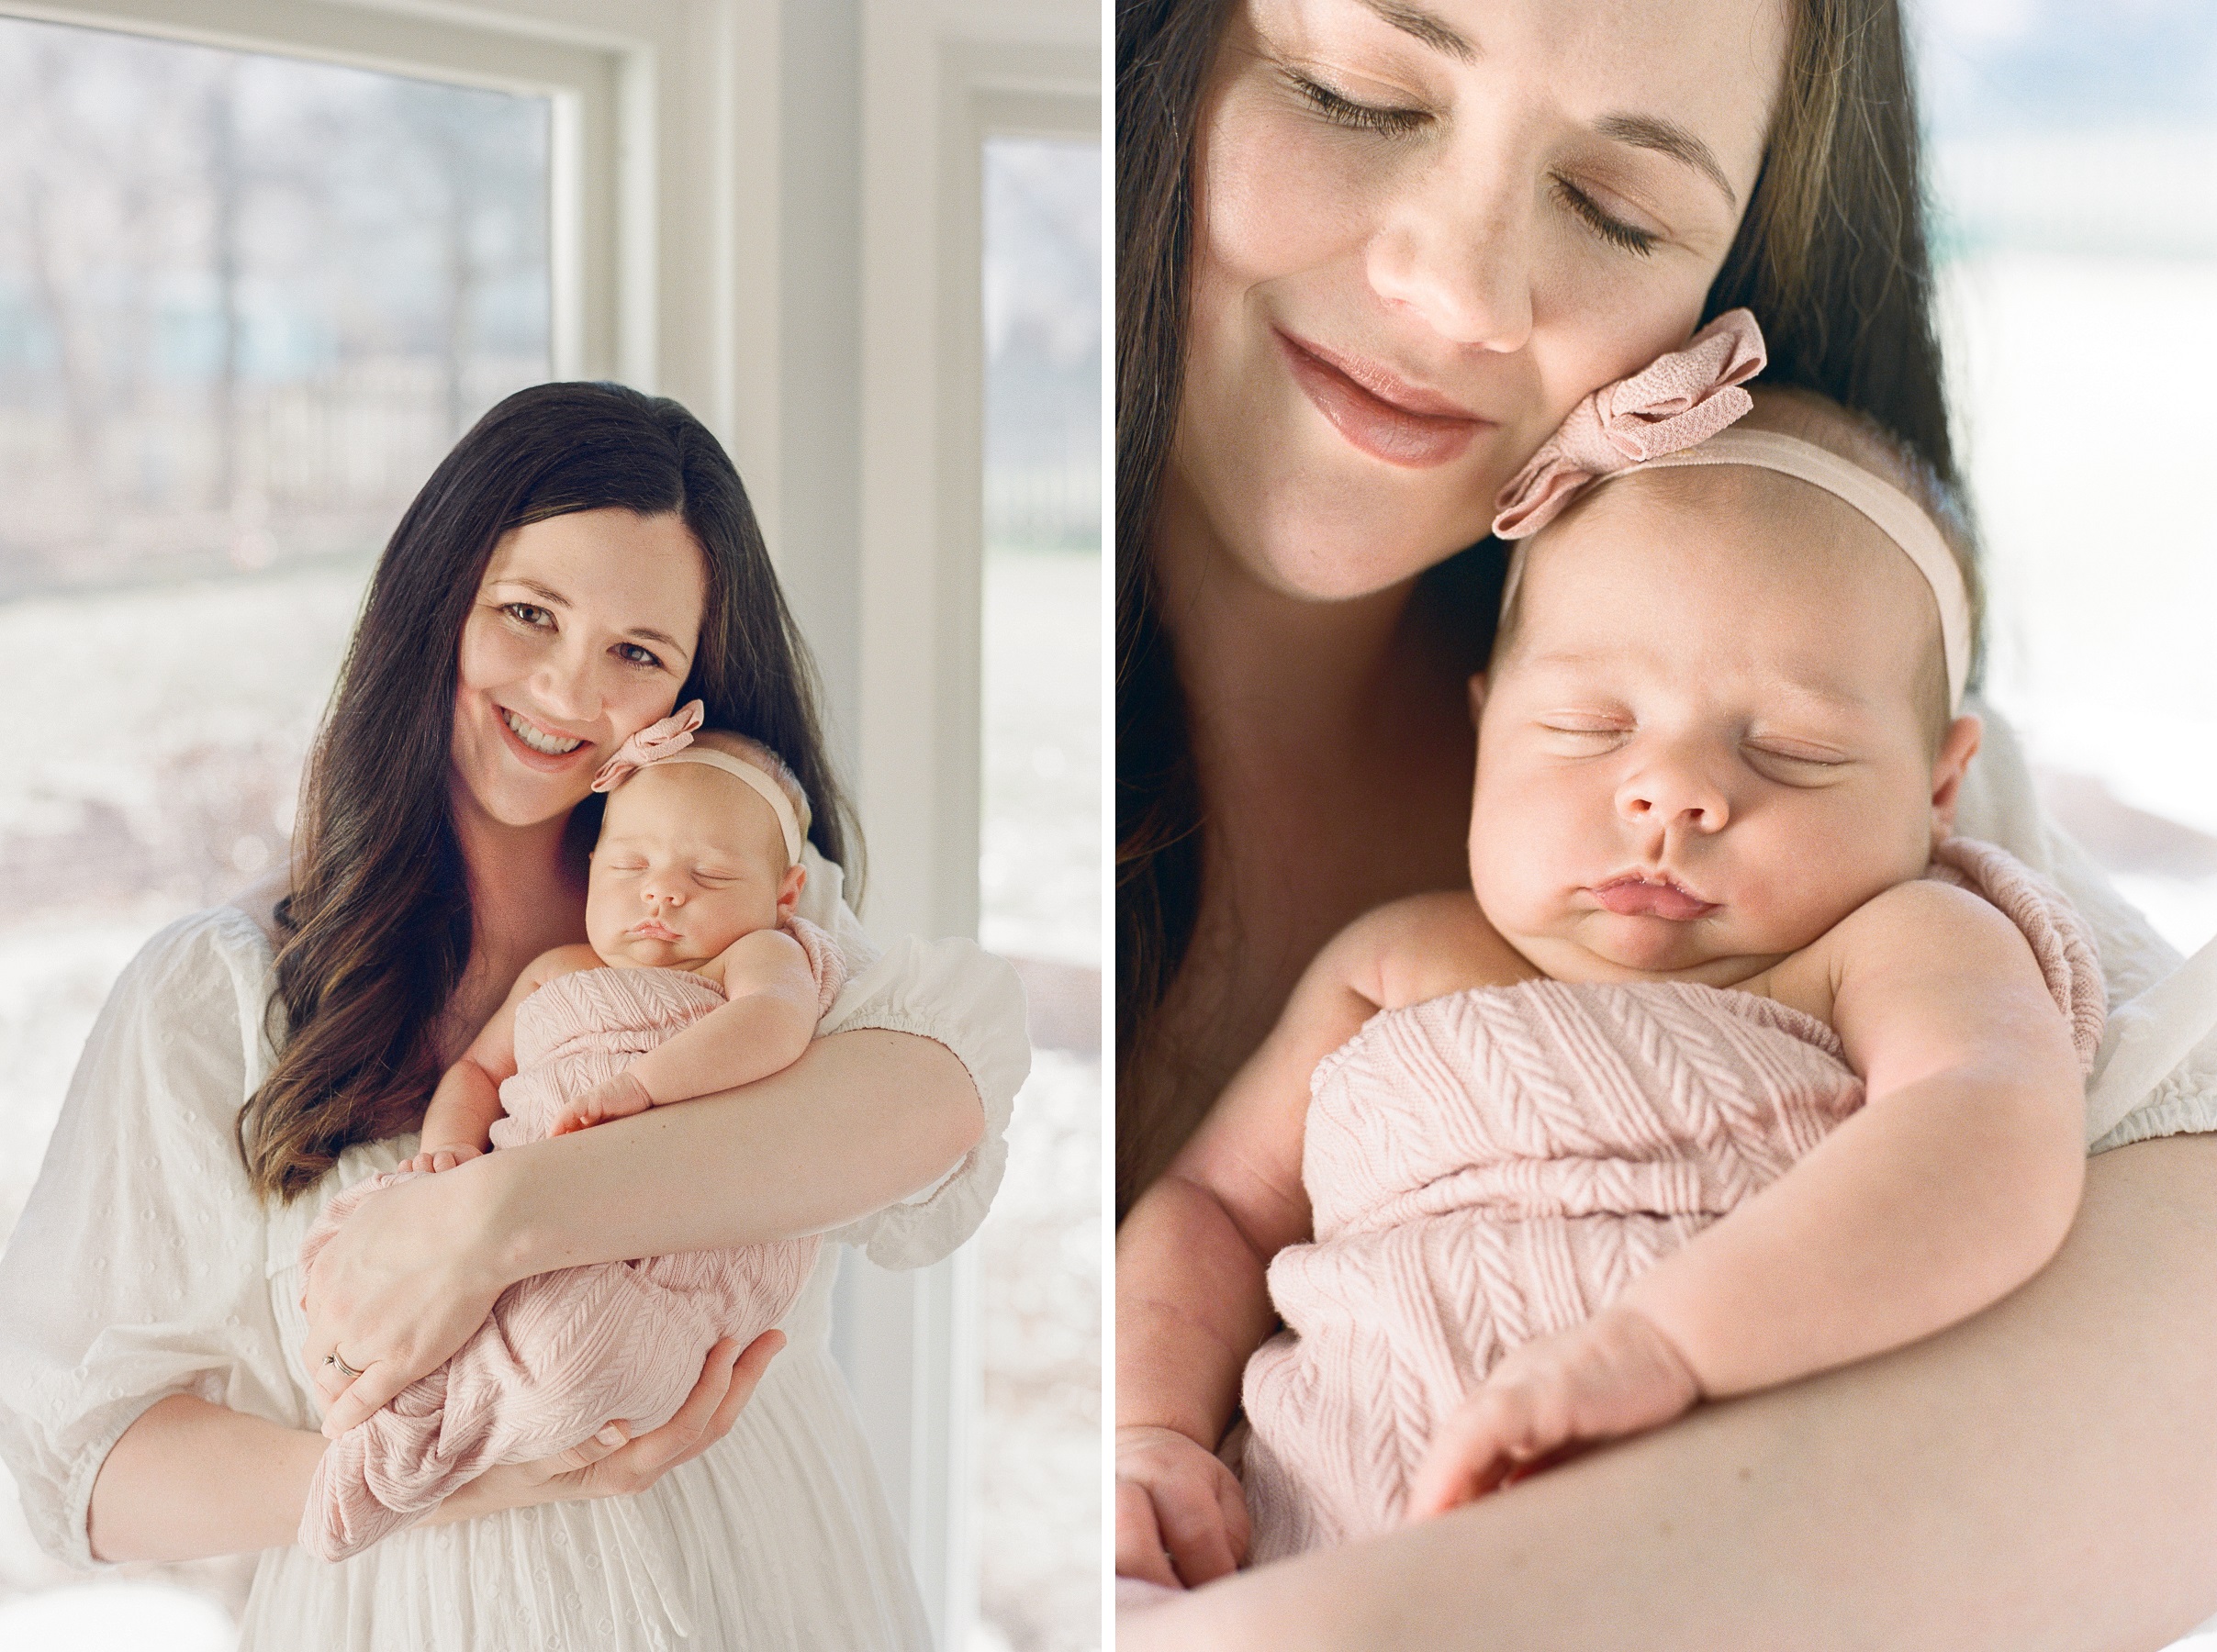 10 - newborn session at home in overland park, kansas baby girl with mom smiling and snuggling